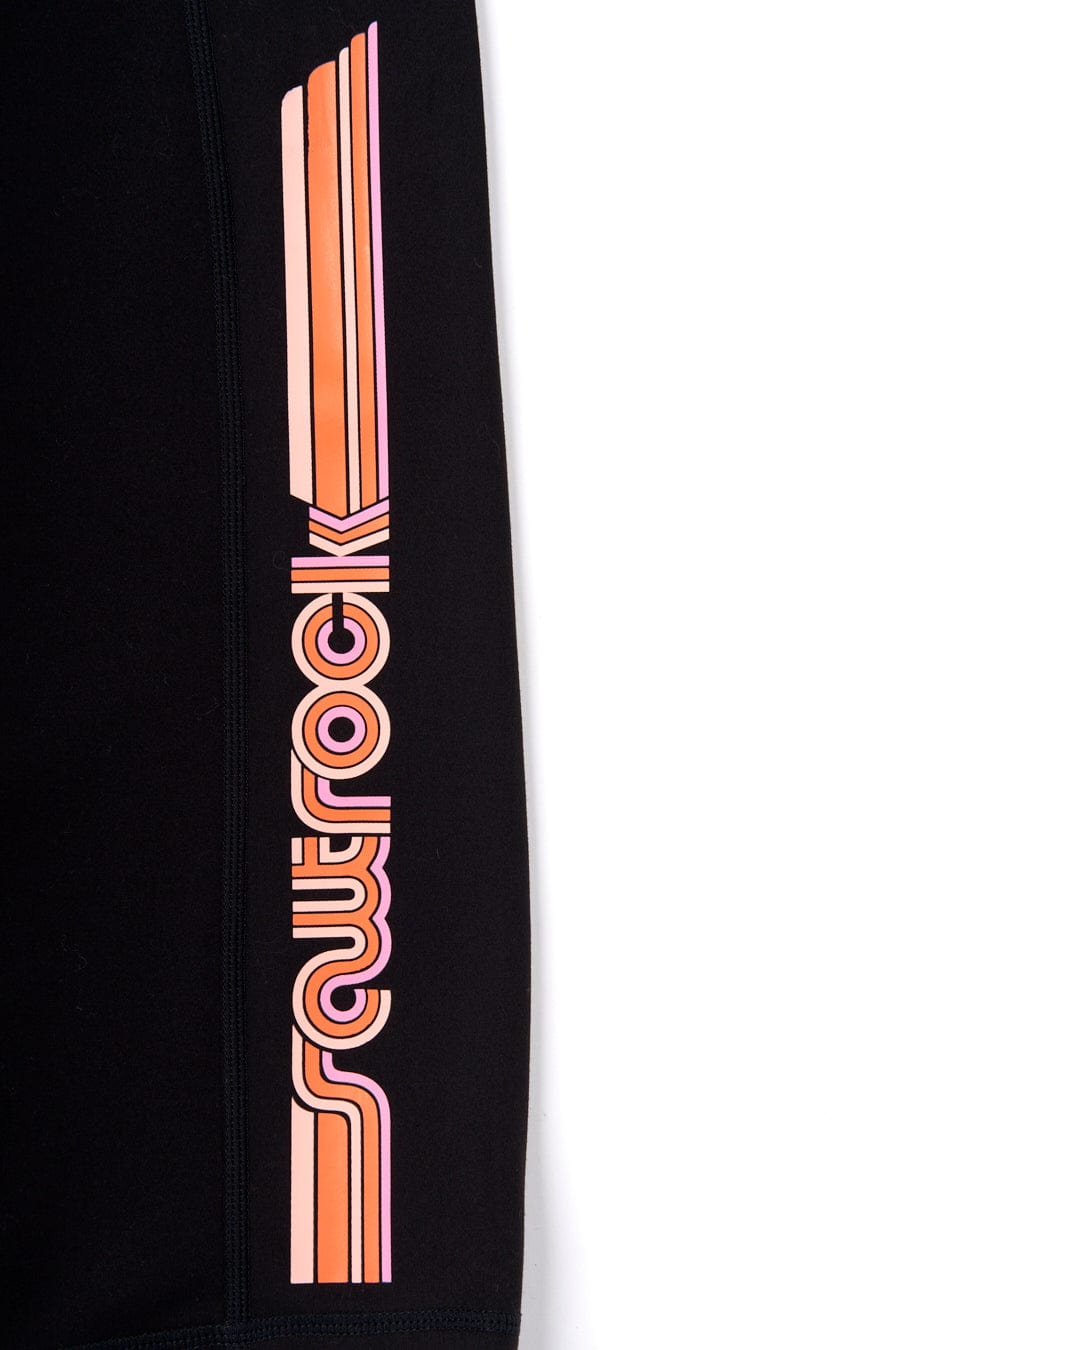 A Retro Ribbon - Womens Cycling Short - Black with orange and black stripes, made from super soft fabric by Saltrock.